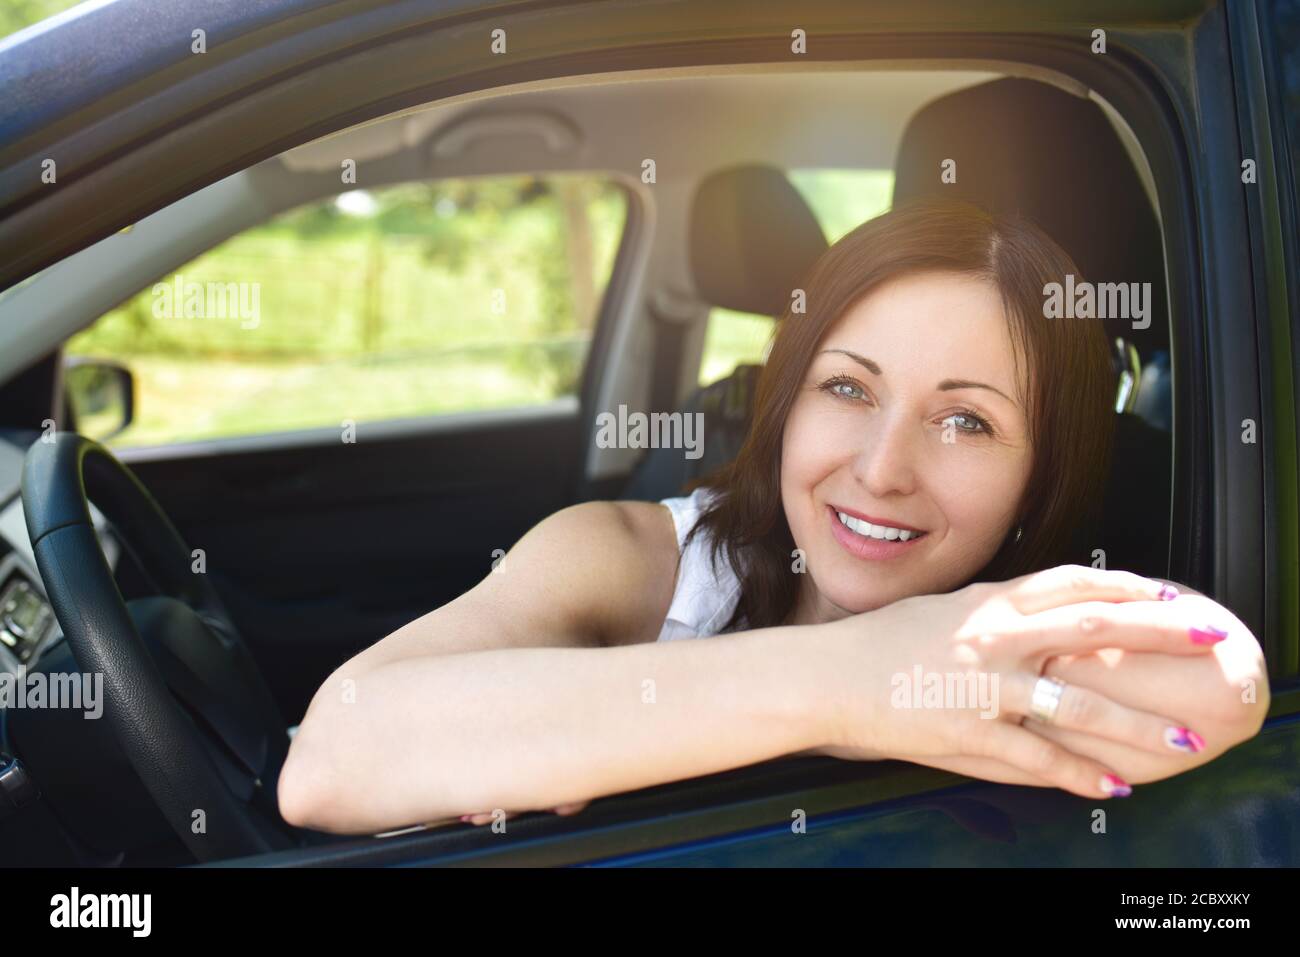 Smiling female driver looking out the car. a portrait of a smiling woman sitting in the car, looking at the camera. Stock Photo